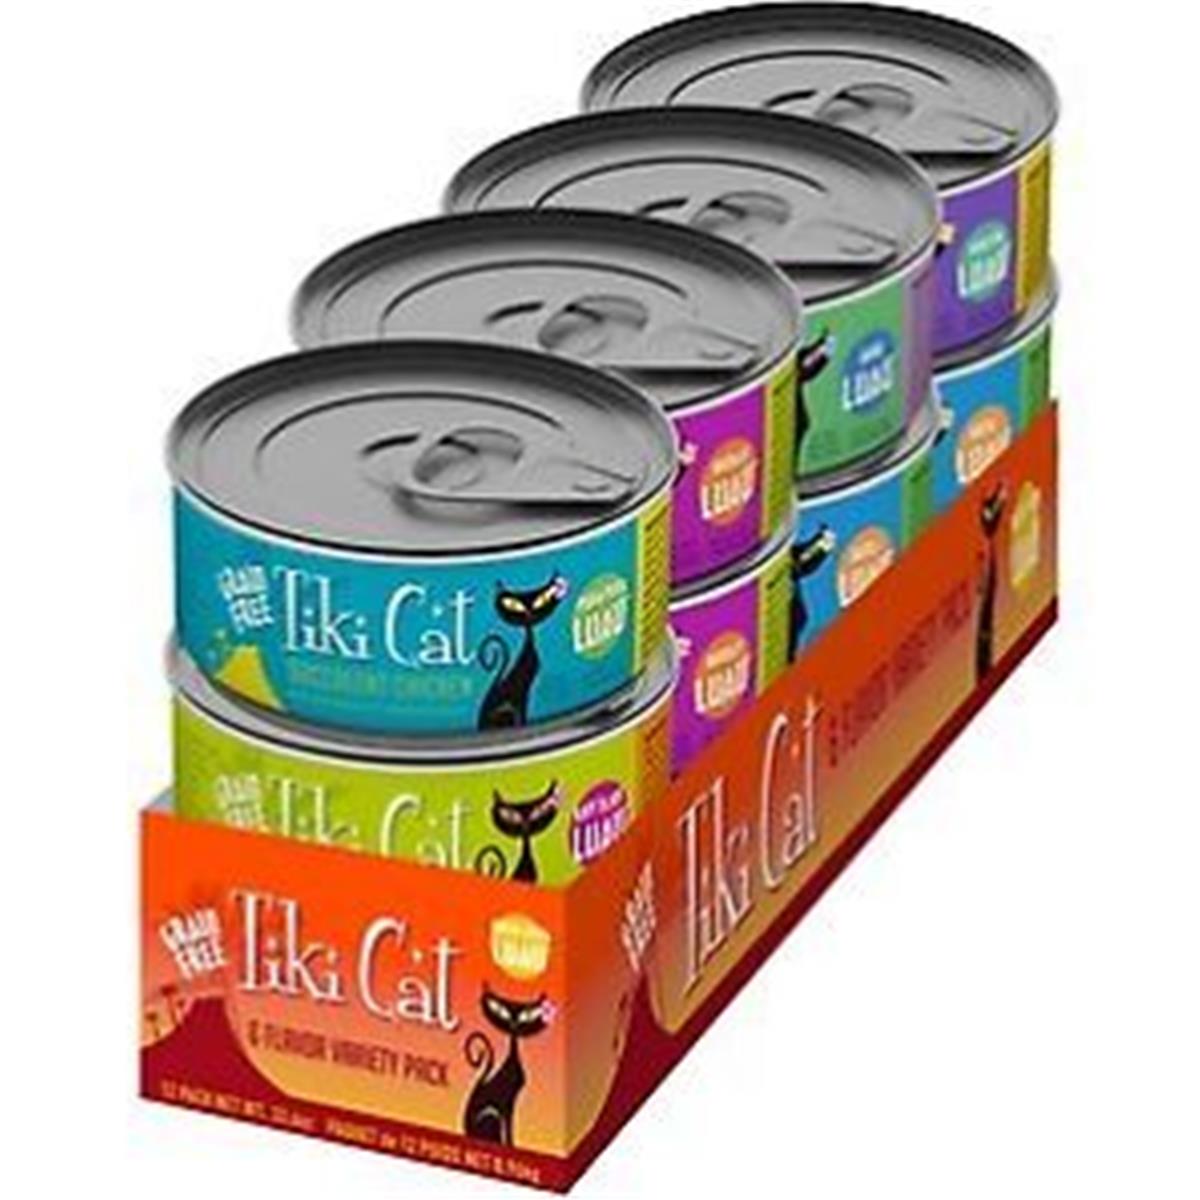 Tk11201 Cat Queen Emma Luau, Variety Pack Grain-free Canned Cat Food, 2.8 Oz - Case Of 12